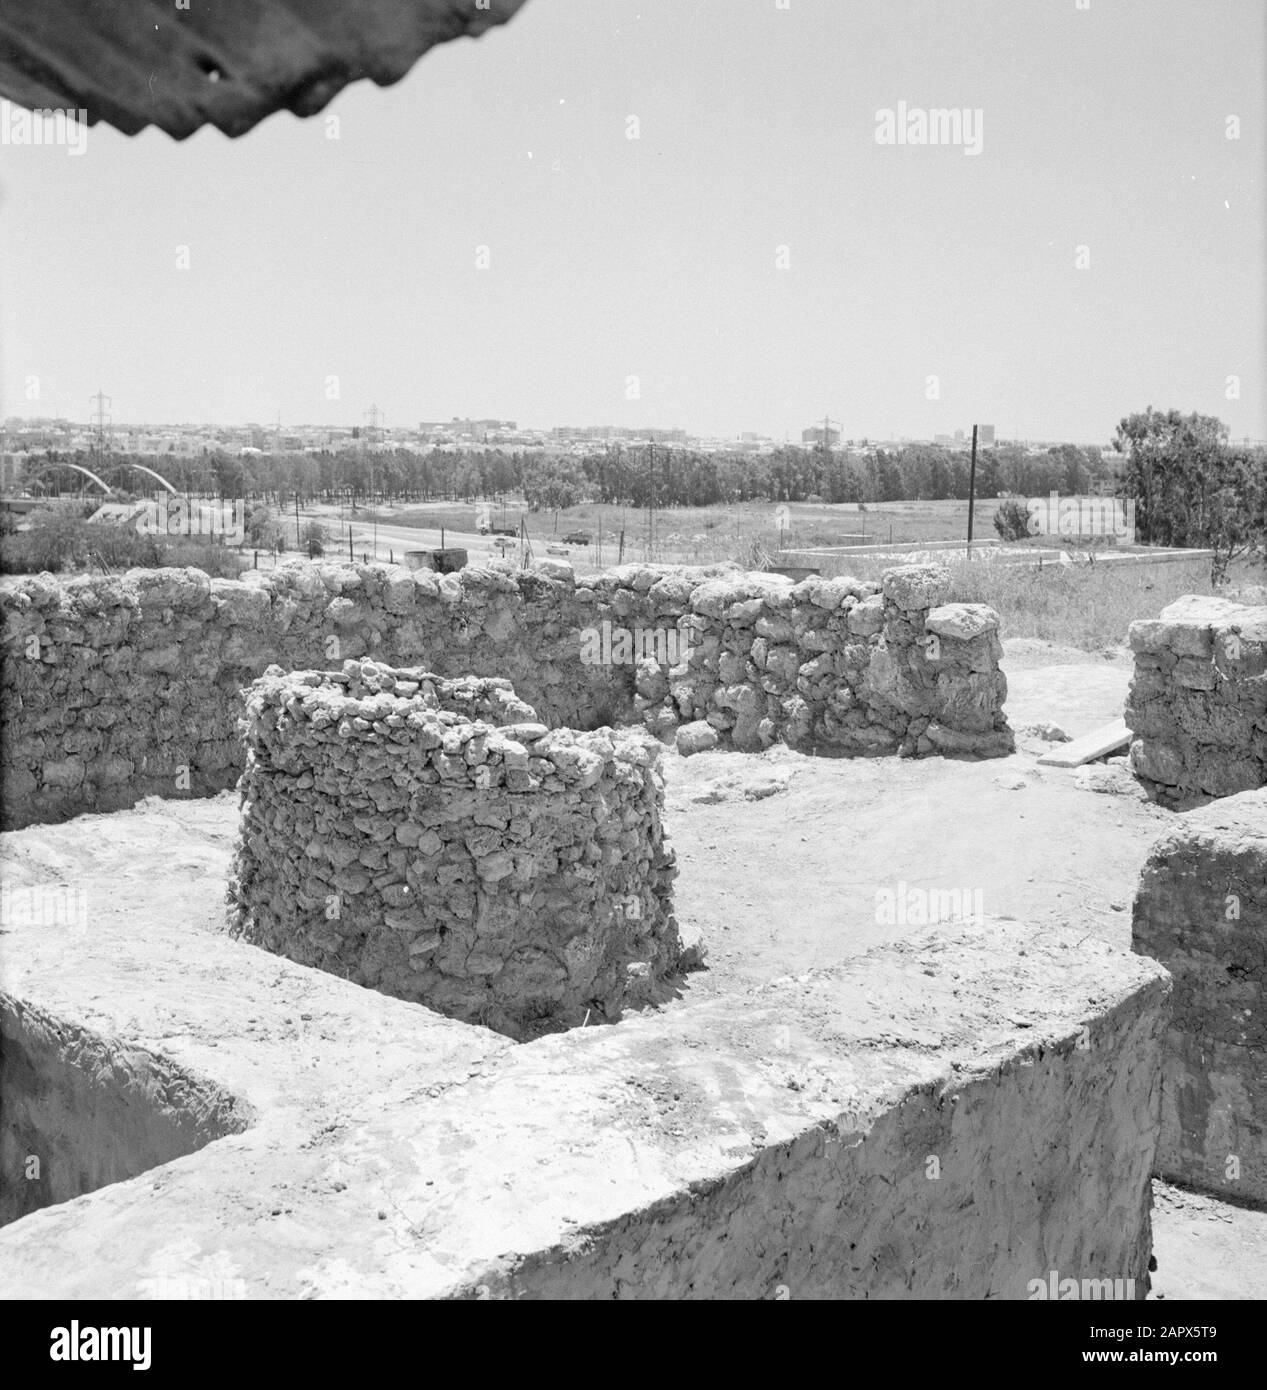 Israel - Quasileh  Quasileh. Archaeological remains on the Napoleon Hill Date: 1 January 1963 Location: Israel, Quasileh Keywords: archeology, hills, landscapes, walls, excavations Personal name: Napoleon (emperor France) Stock Photo